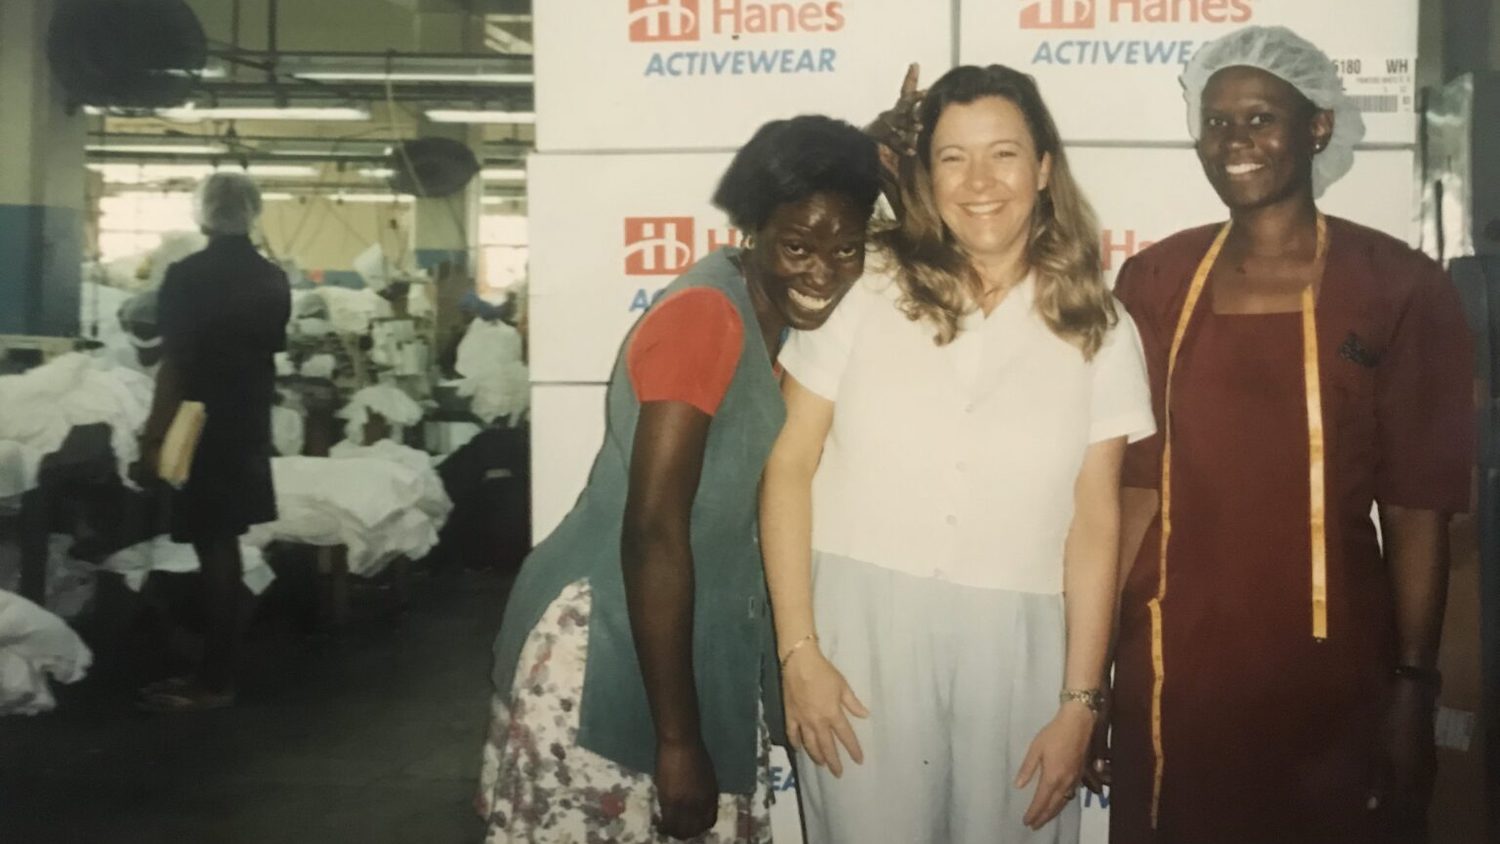 Stanigar at La Moda in 1995 with supervisors Sharon Hardy (left) and Sonia Knight (right).